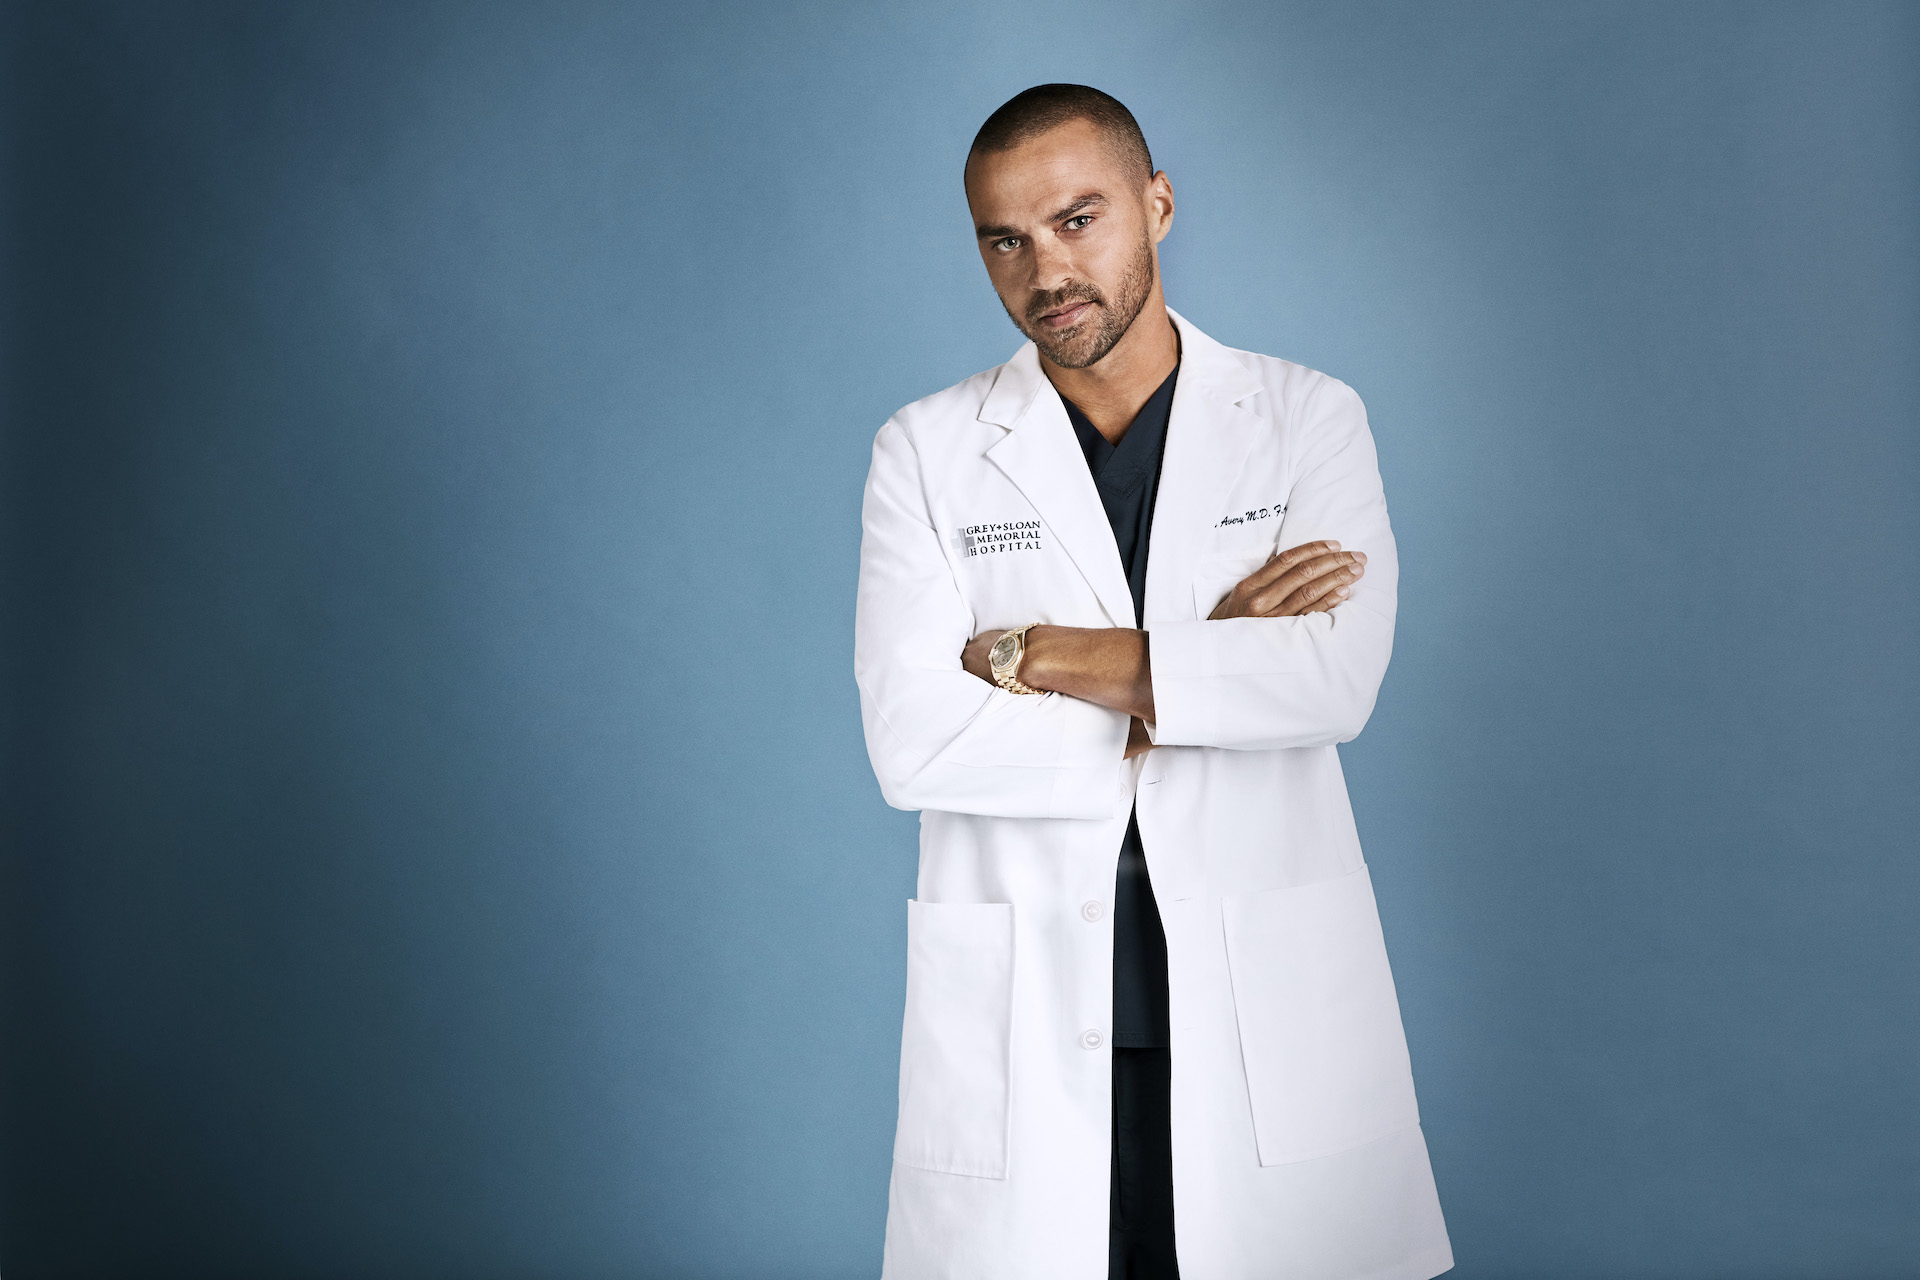 Jesse Williams will be reprising his role in an upcoming episode of 'Grey's Anatomy.' Williams will guest star and direct the fifth episode of season 19.